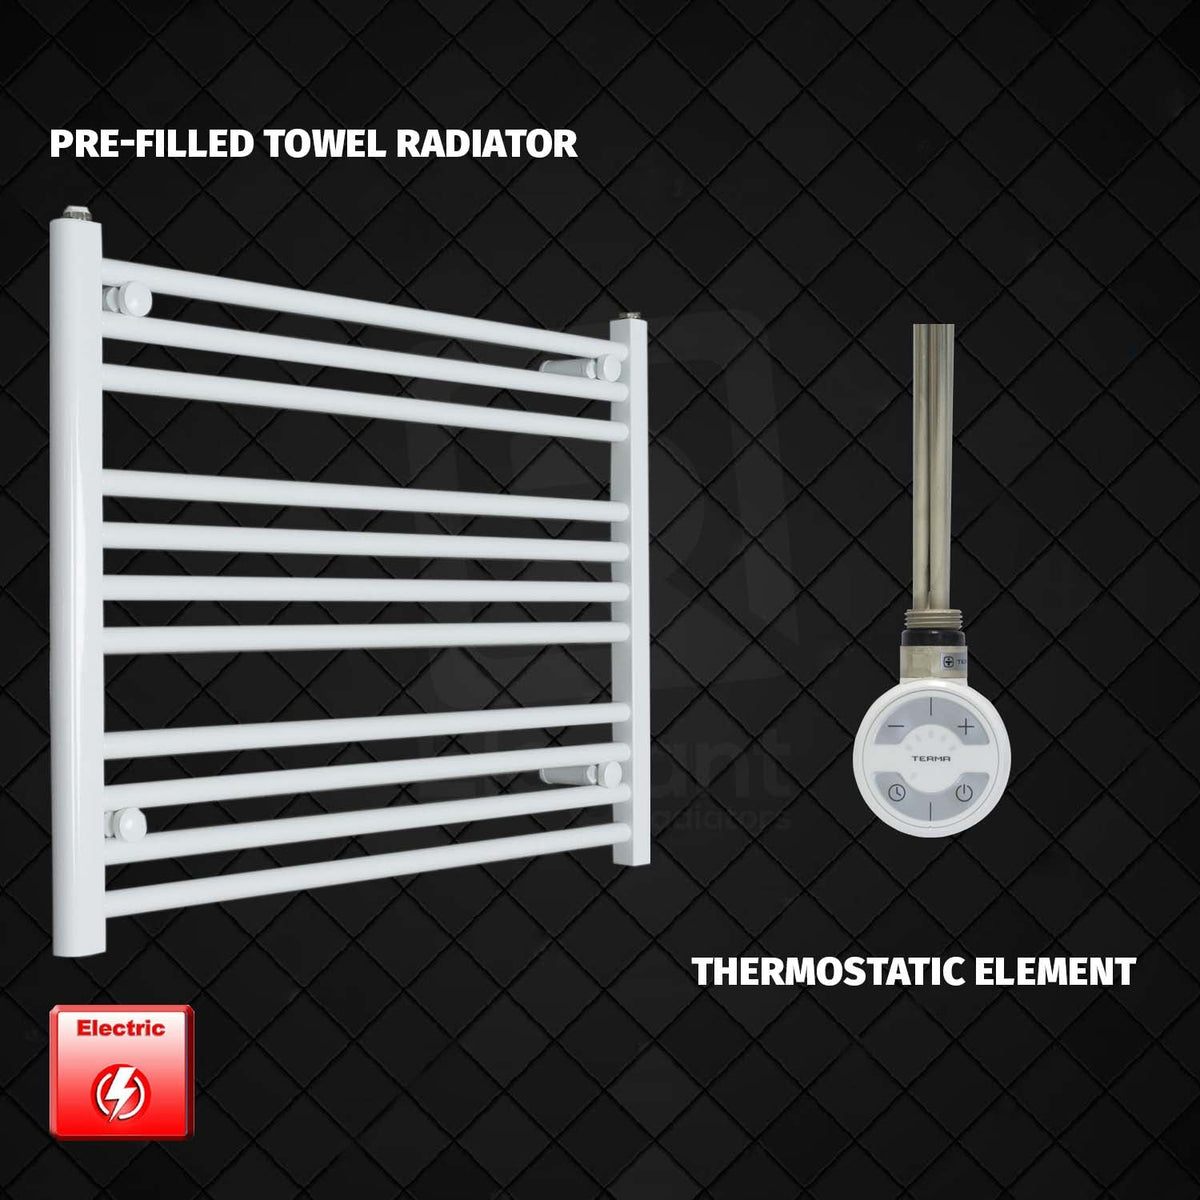 600 x 900 Pre-Filled Electric Heated Towel Radiator White HTR MOA Thermostatic element no timer